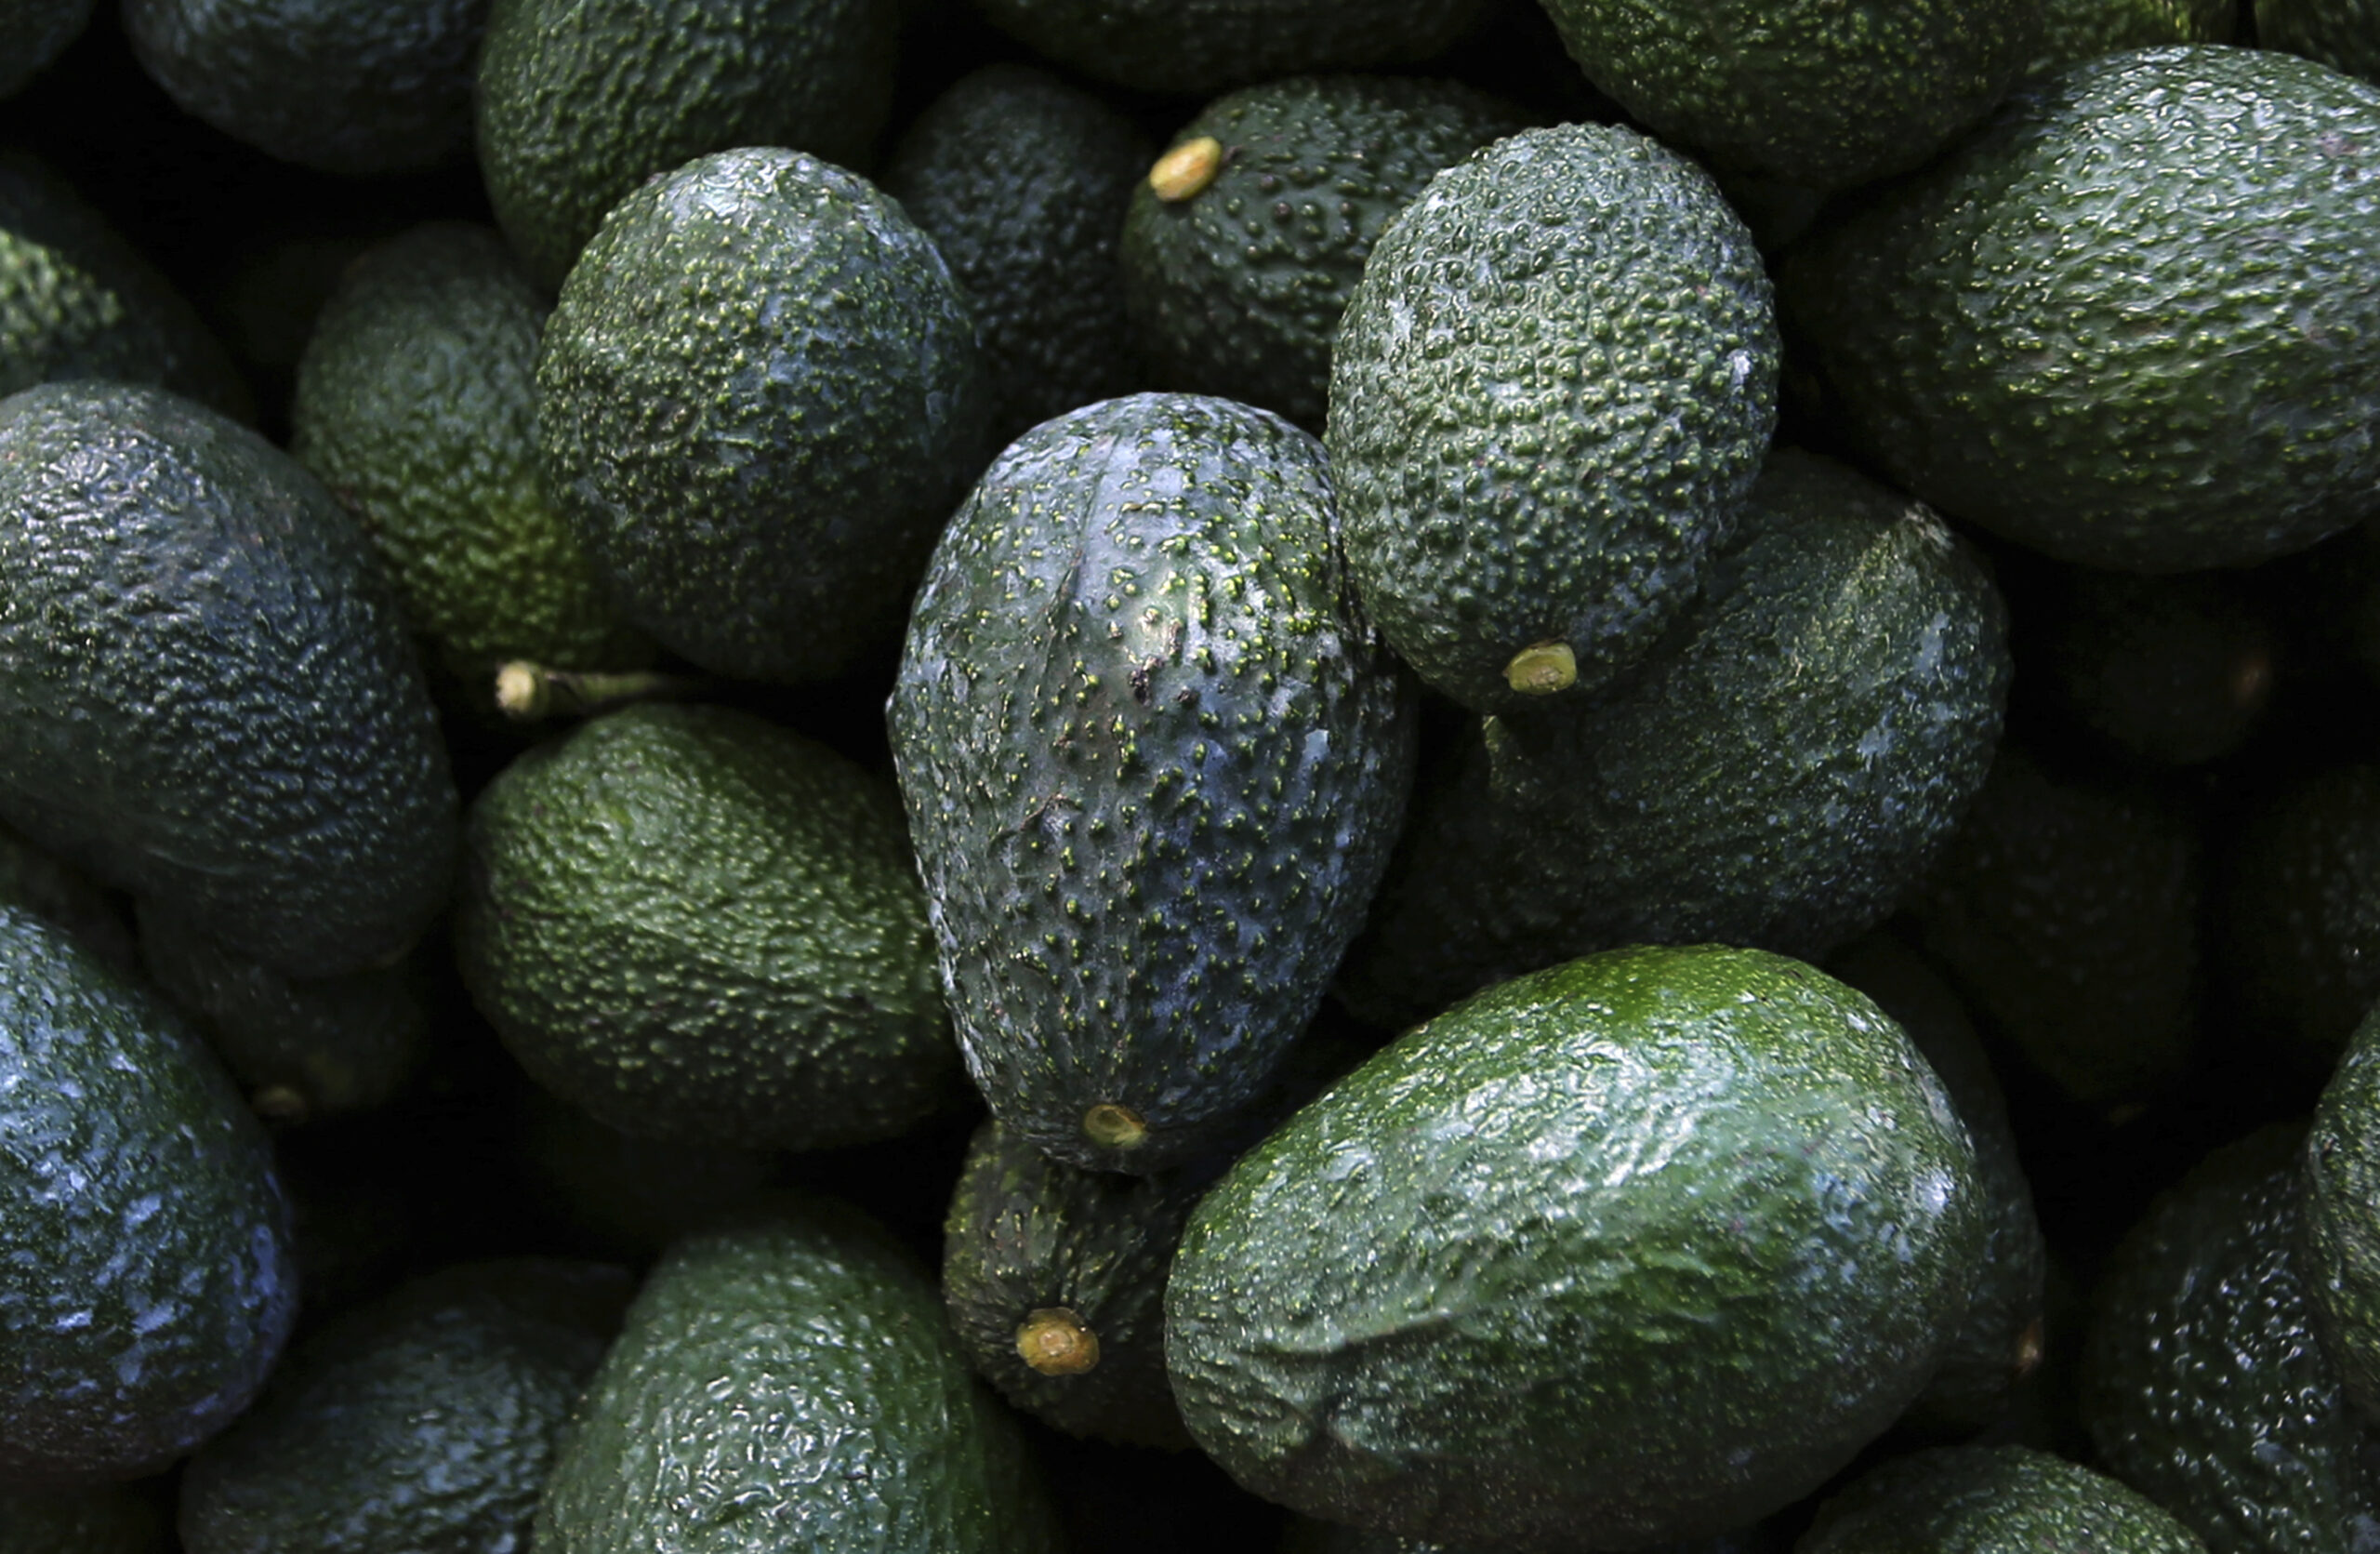 FILE - Recently harvested avocados at an orchard near Ziracuaretiro, Michoacan state, Mexico, Oct. 1, 2019. Mexico has acknowledged late Saturday, Feb. 13, 20222, that the U.S. government has suspended all imports of Mexican avocados after a U.S. plant safety inspector in Mexico received a threat. (AP Photo/Marco Ugarte, File)